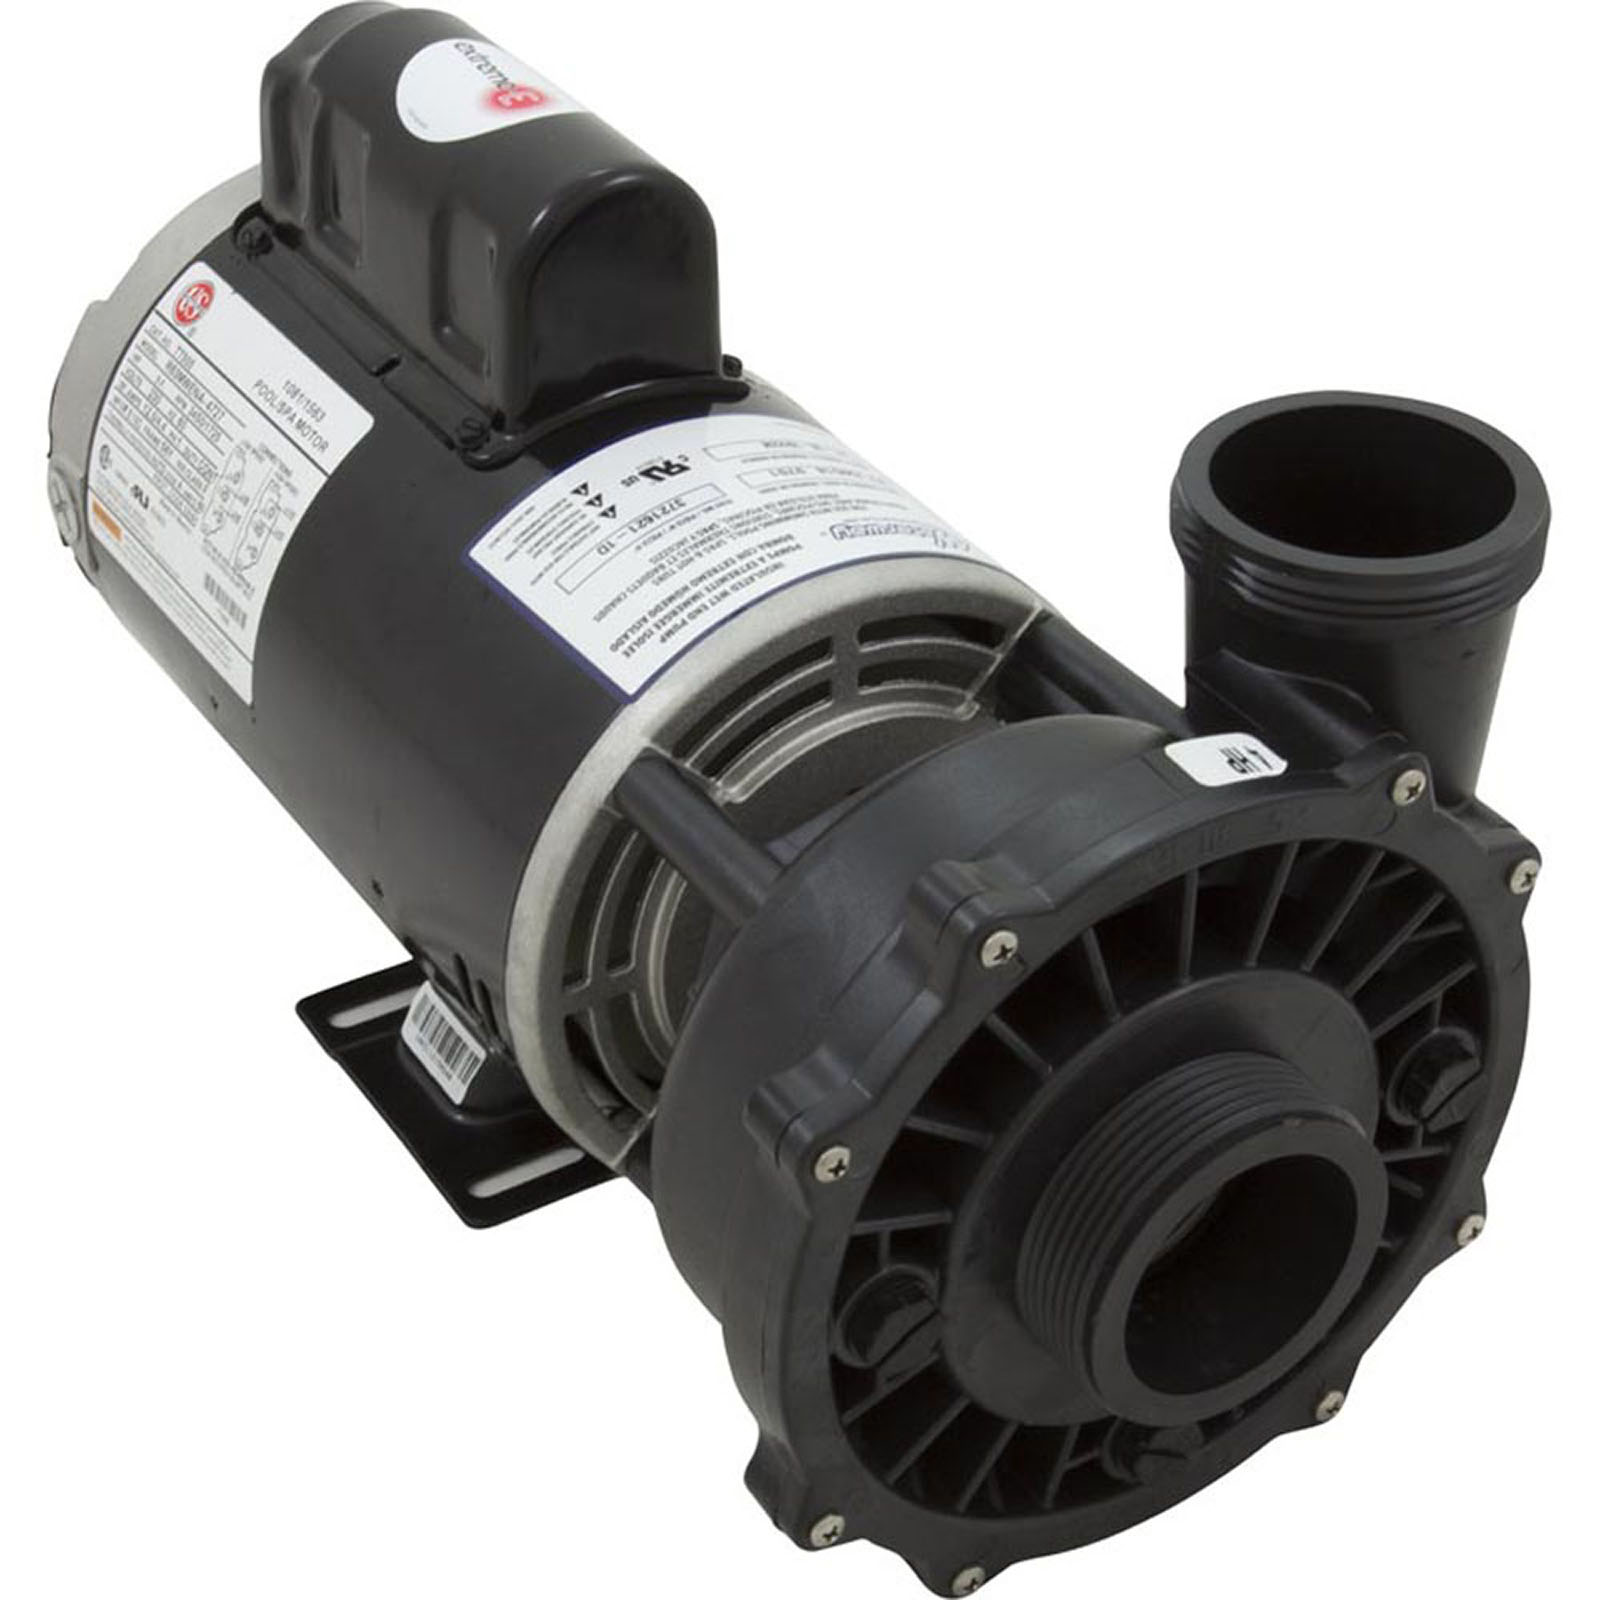 34-270-3594 - Pump Complete, Waterway Exec, 56 Frame, 2 Inch ,4HP,,230V,,2-Spd - 3721621-1D - 34-270-3594